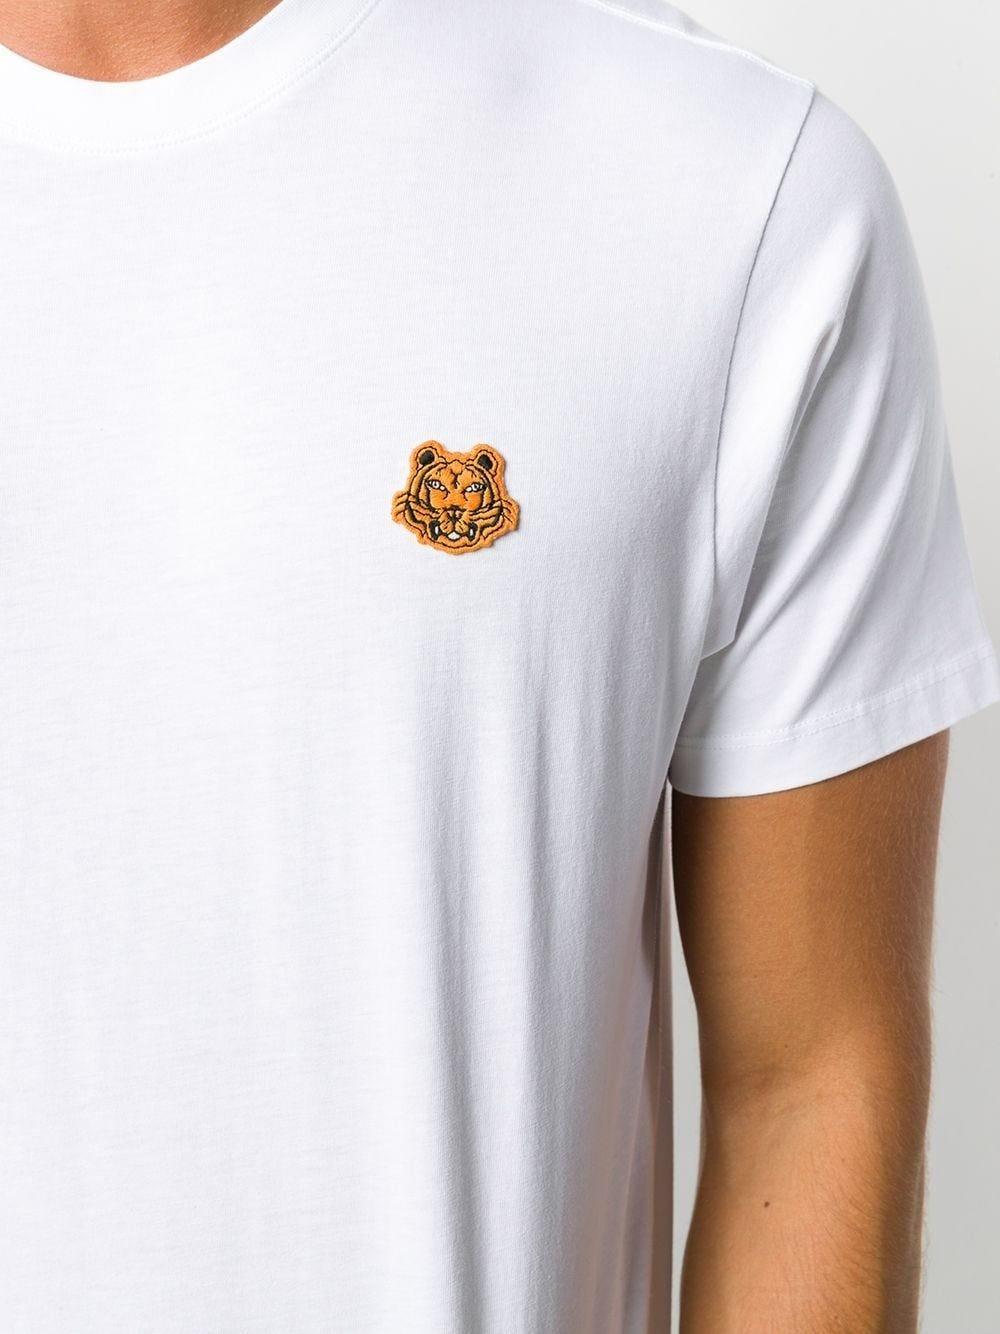 KENZO Cotton Tiger Crest T-shirt in White for Men - Lyst